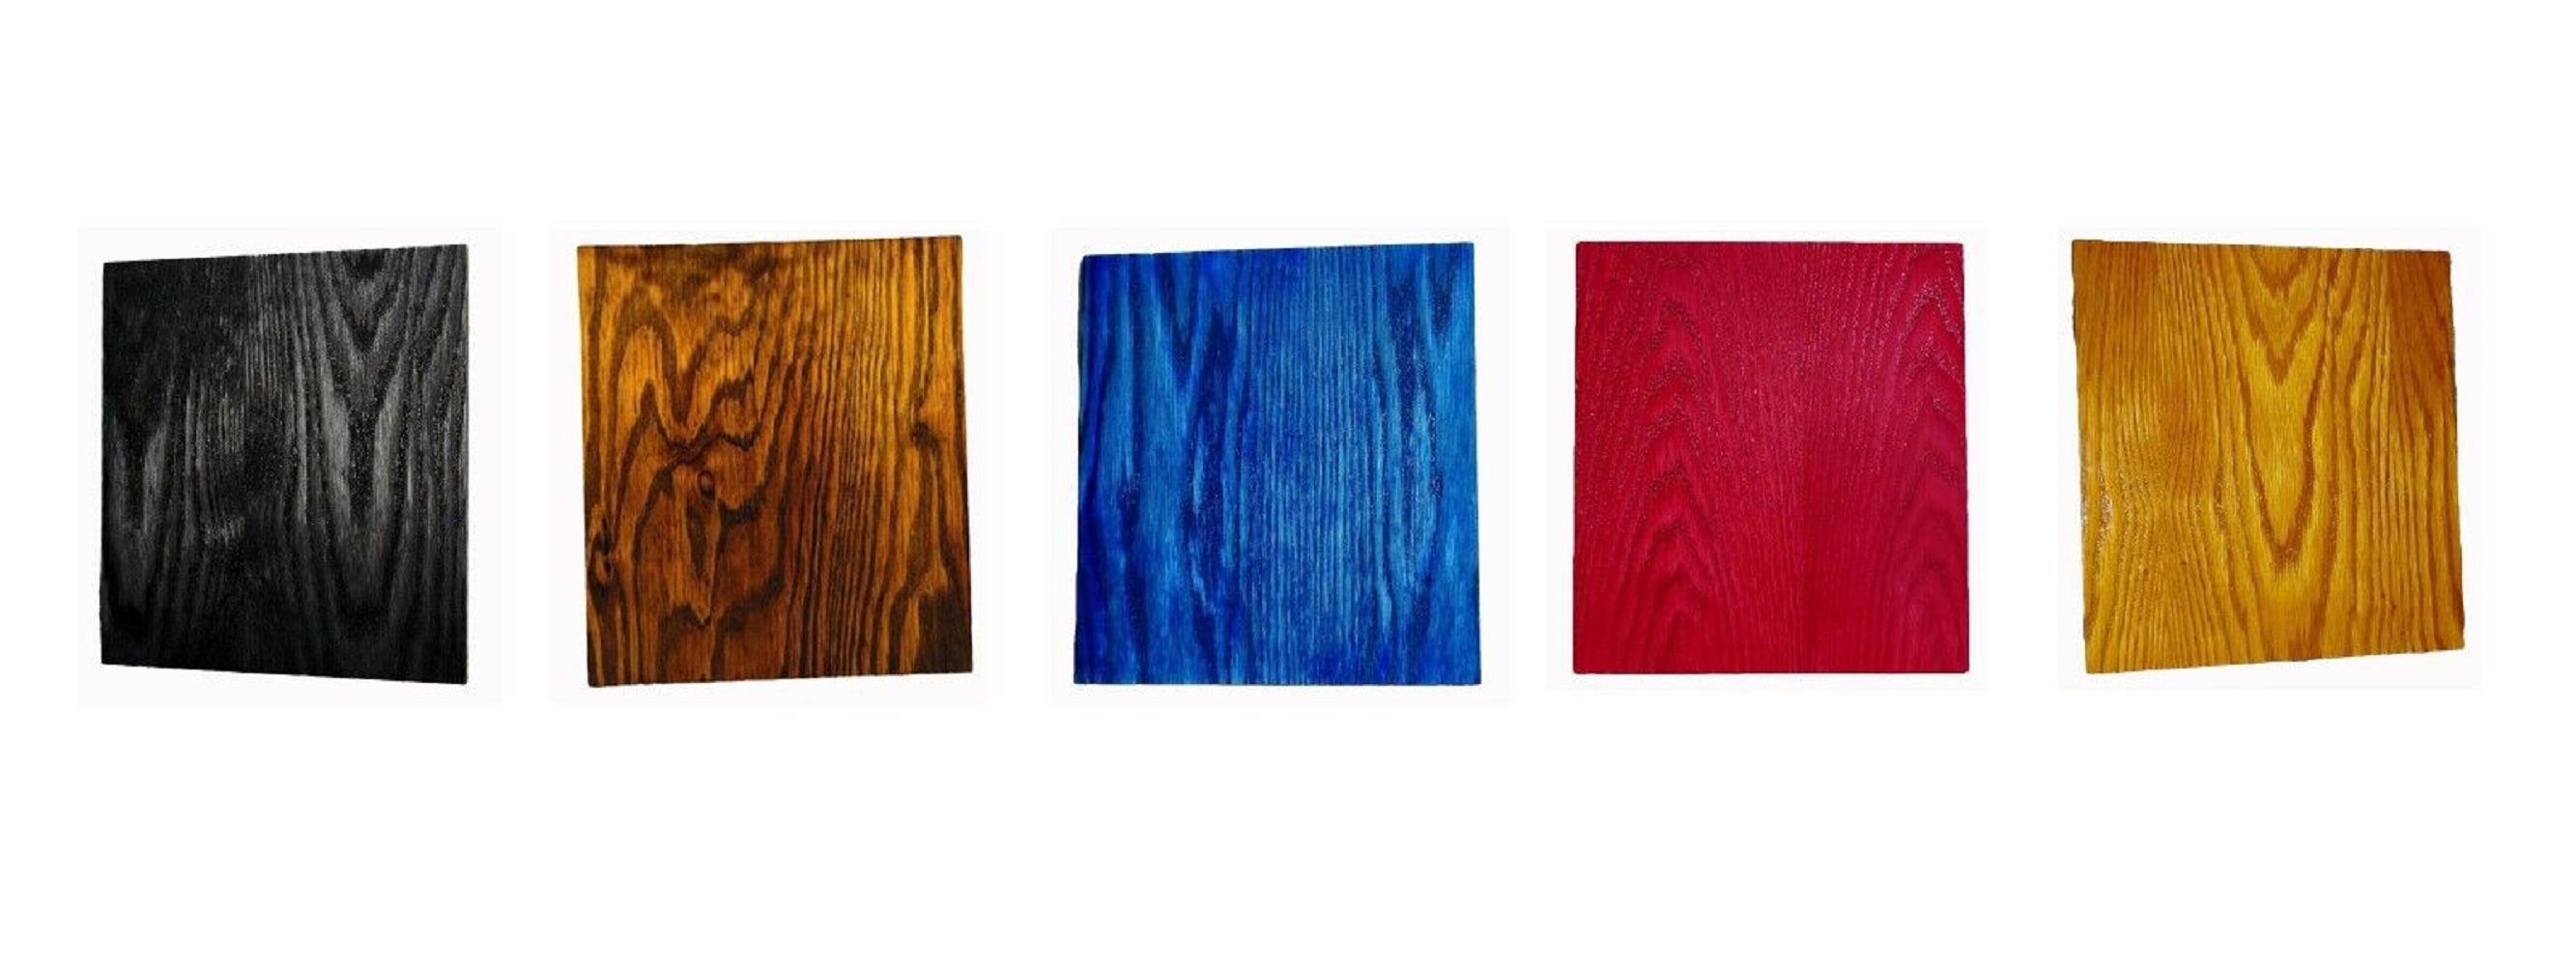 Wood Dye - Aniline 5 Color Kit - Stain